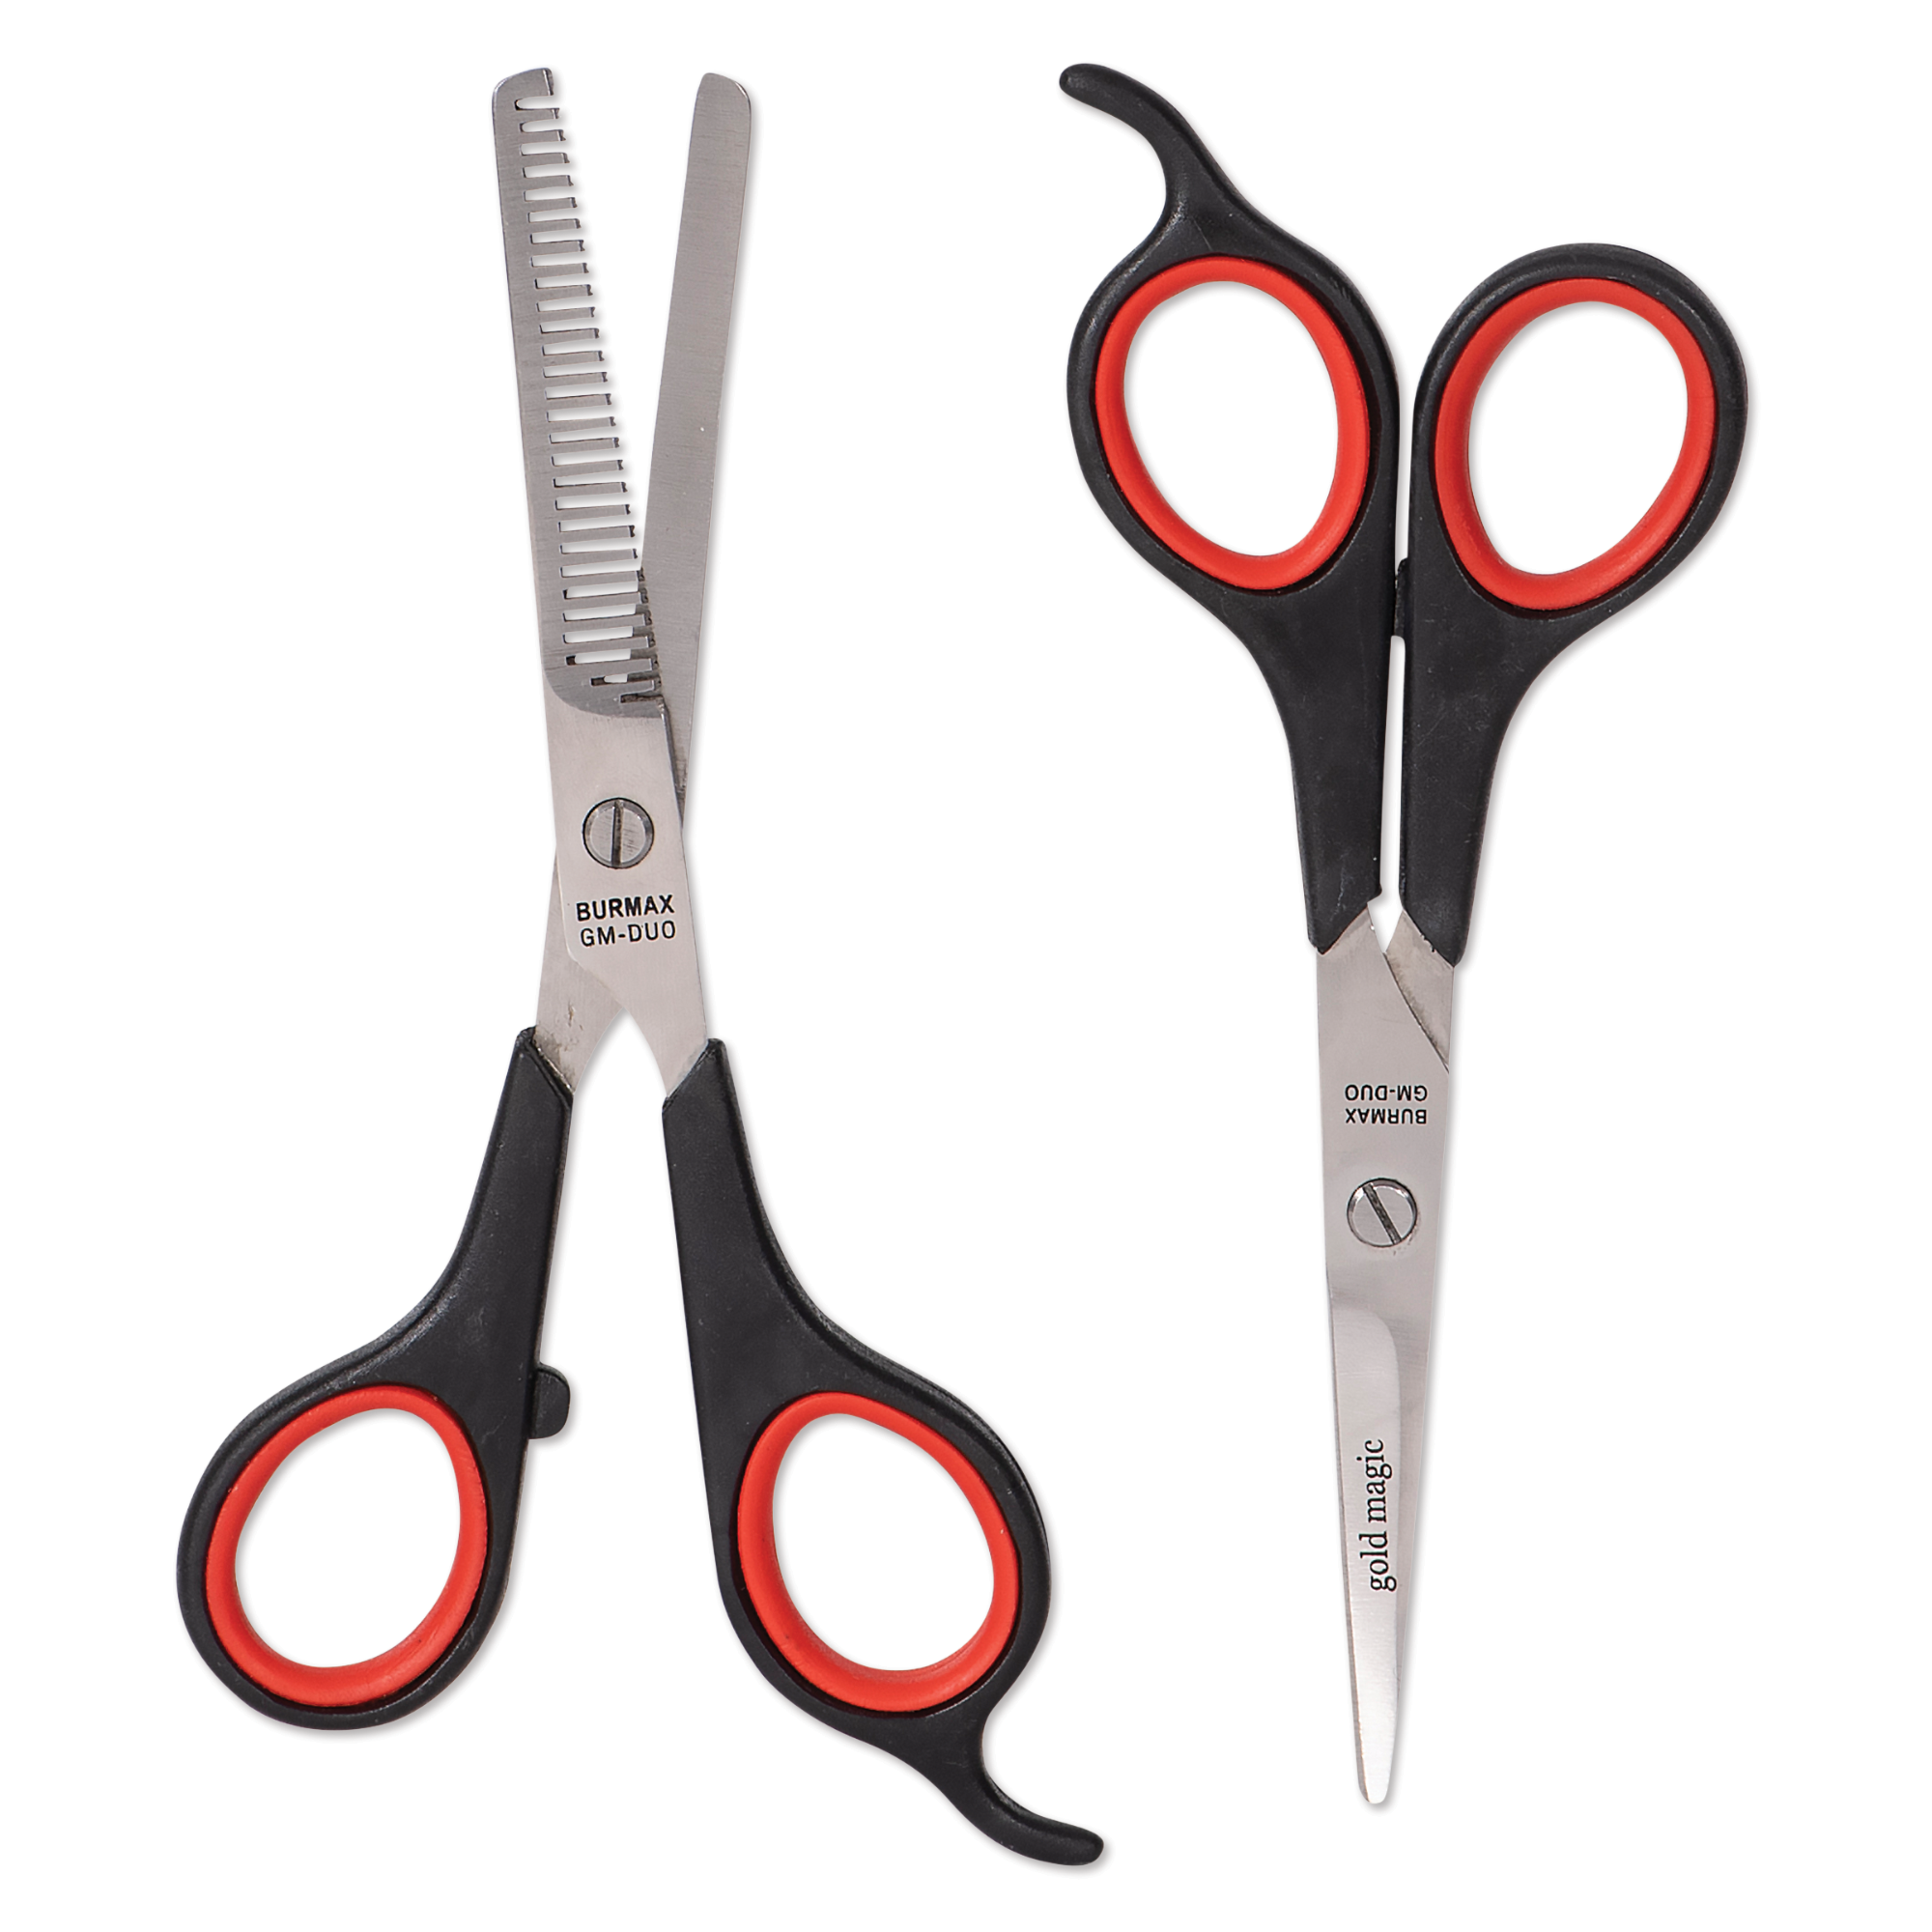 6" Stainless Steel Cutting & Thinning Shear Combo